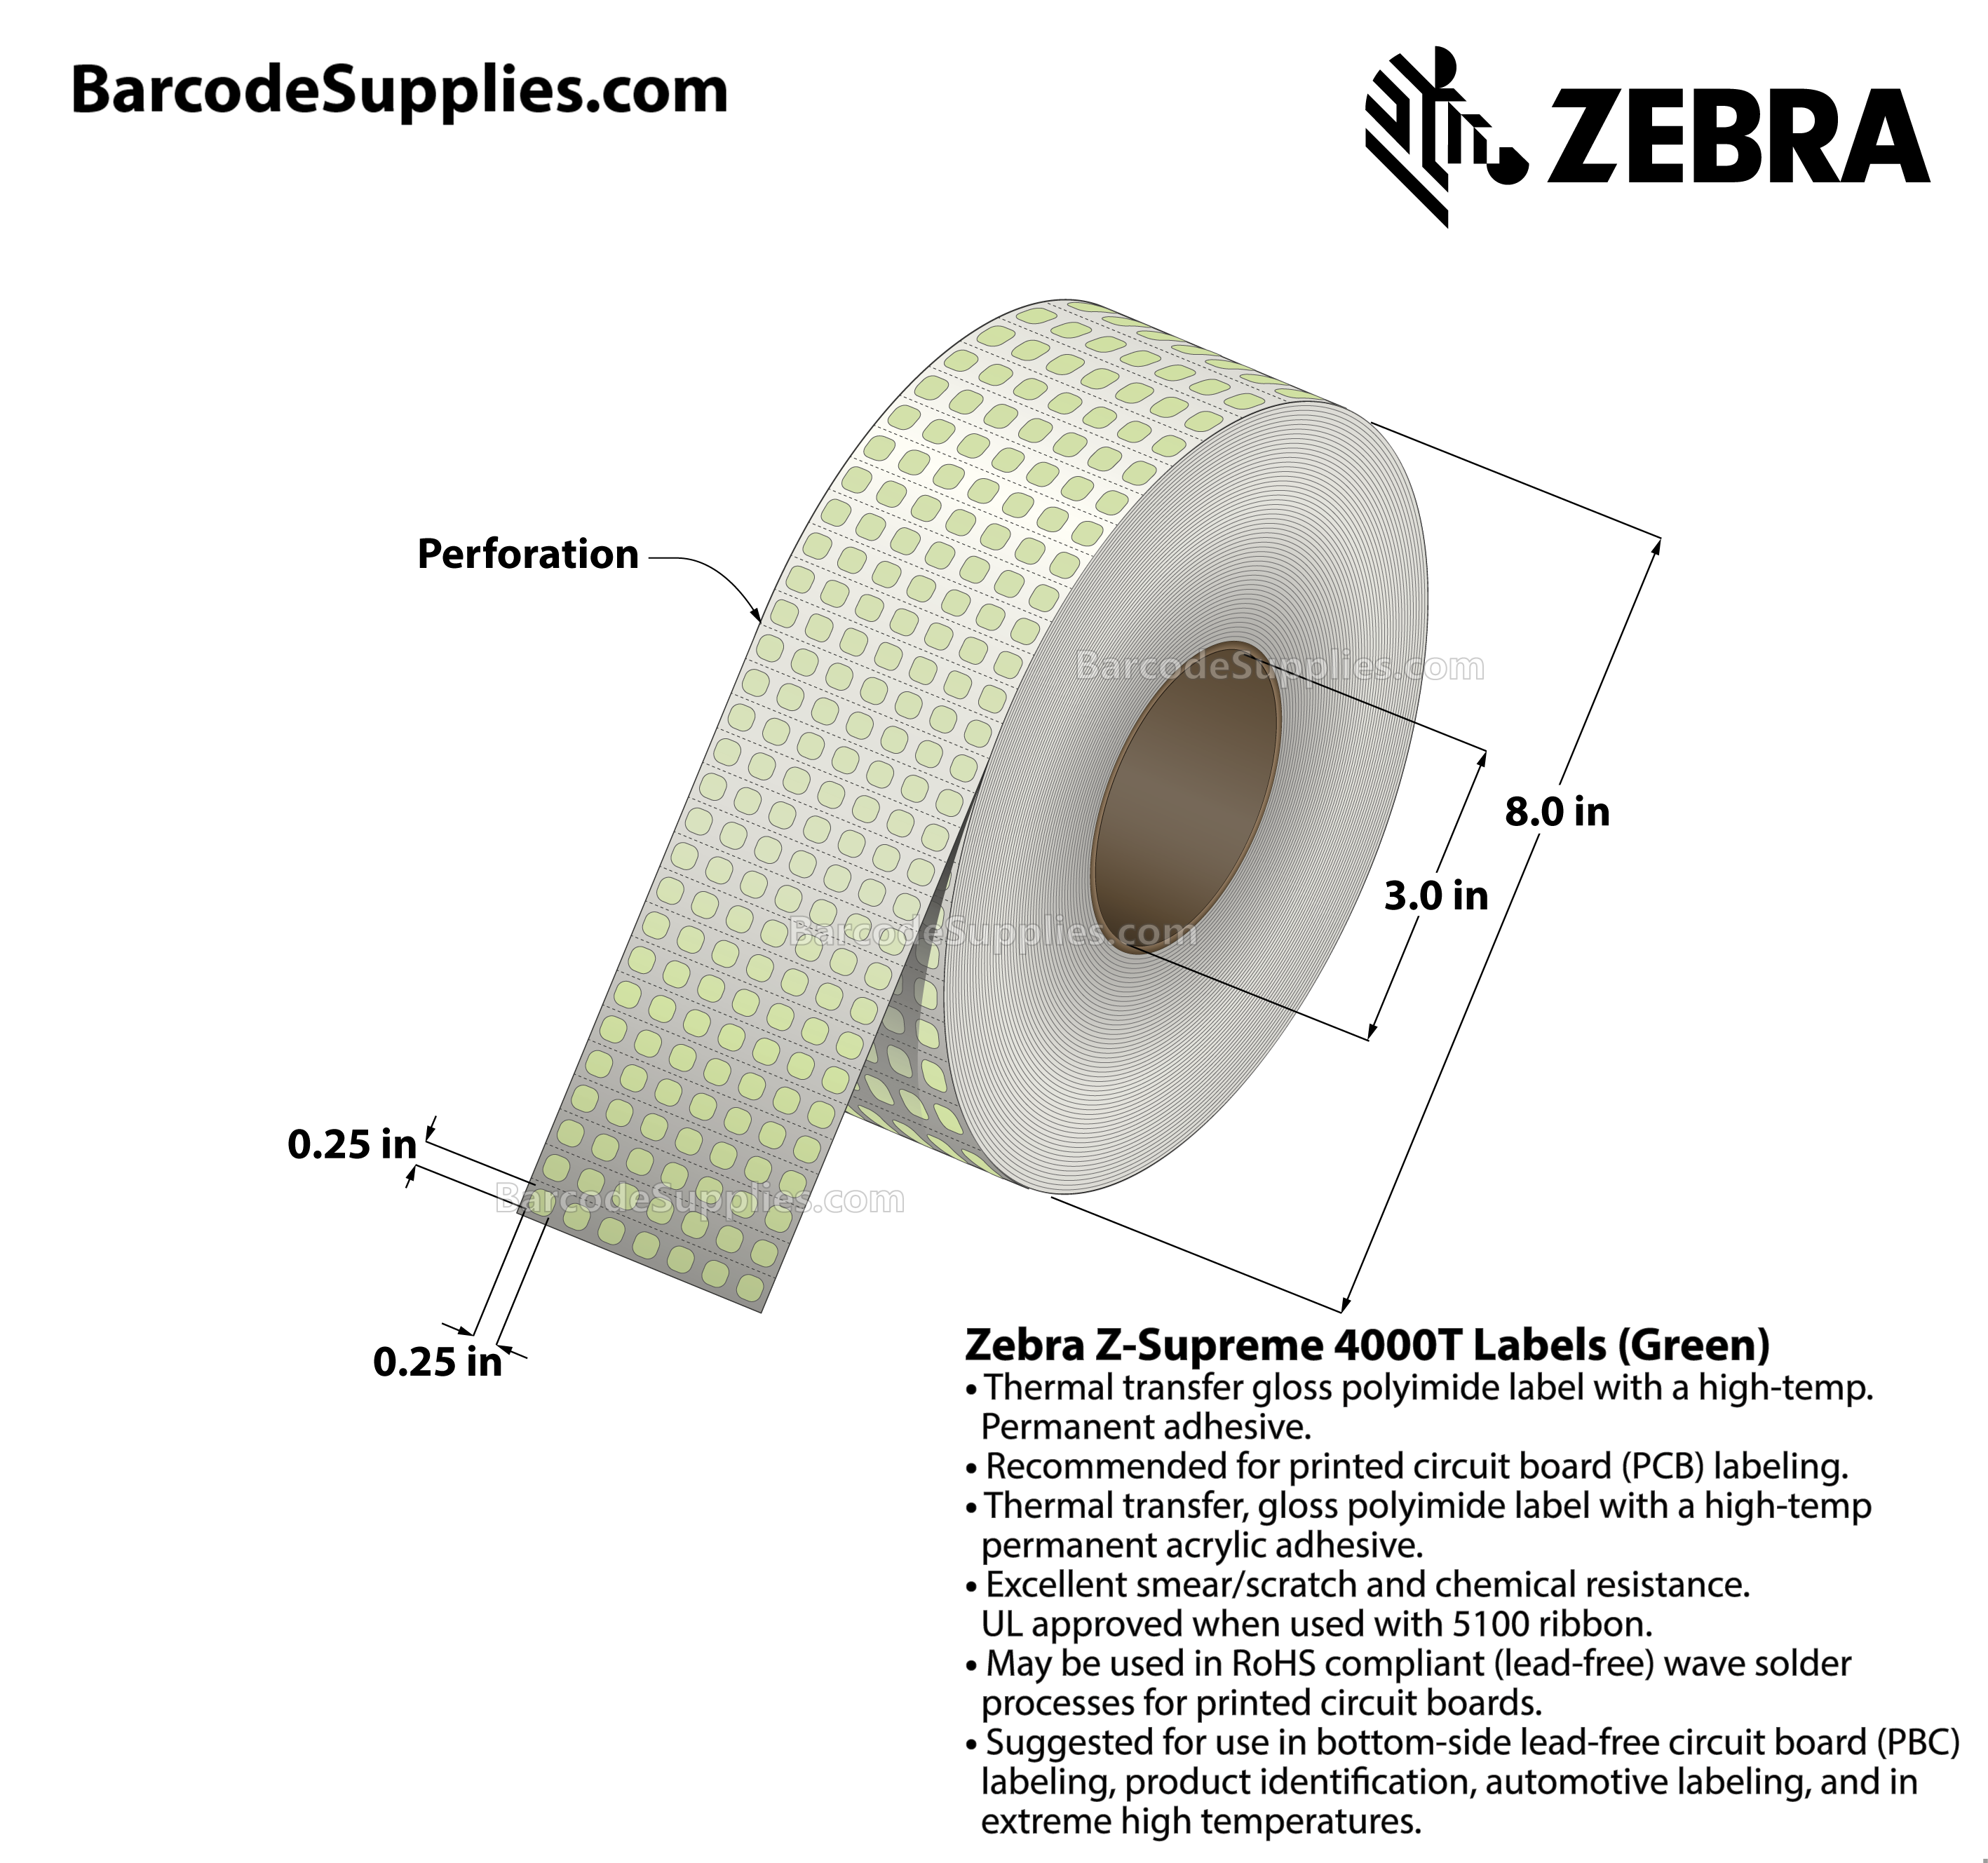 0.25 x 0.25 Thermal Transfer Green Z-Supreme 4000T Green (7-Across) Labels With High-temp Adhesive - Perforated - 20006 Labels Per Roll - Carton Of 1 Rolls - 20006 Labels Total - MPN: 10023309